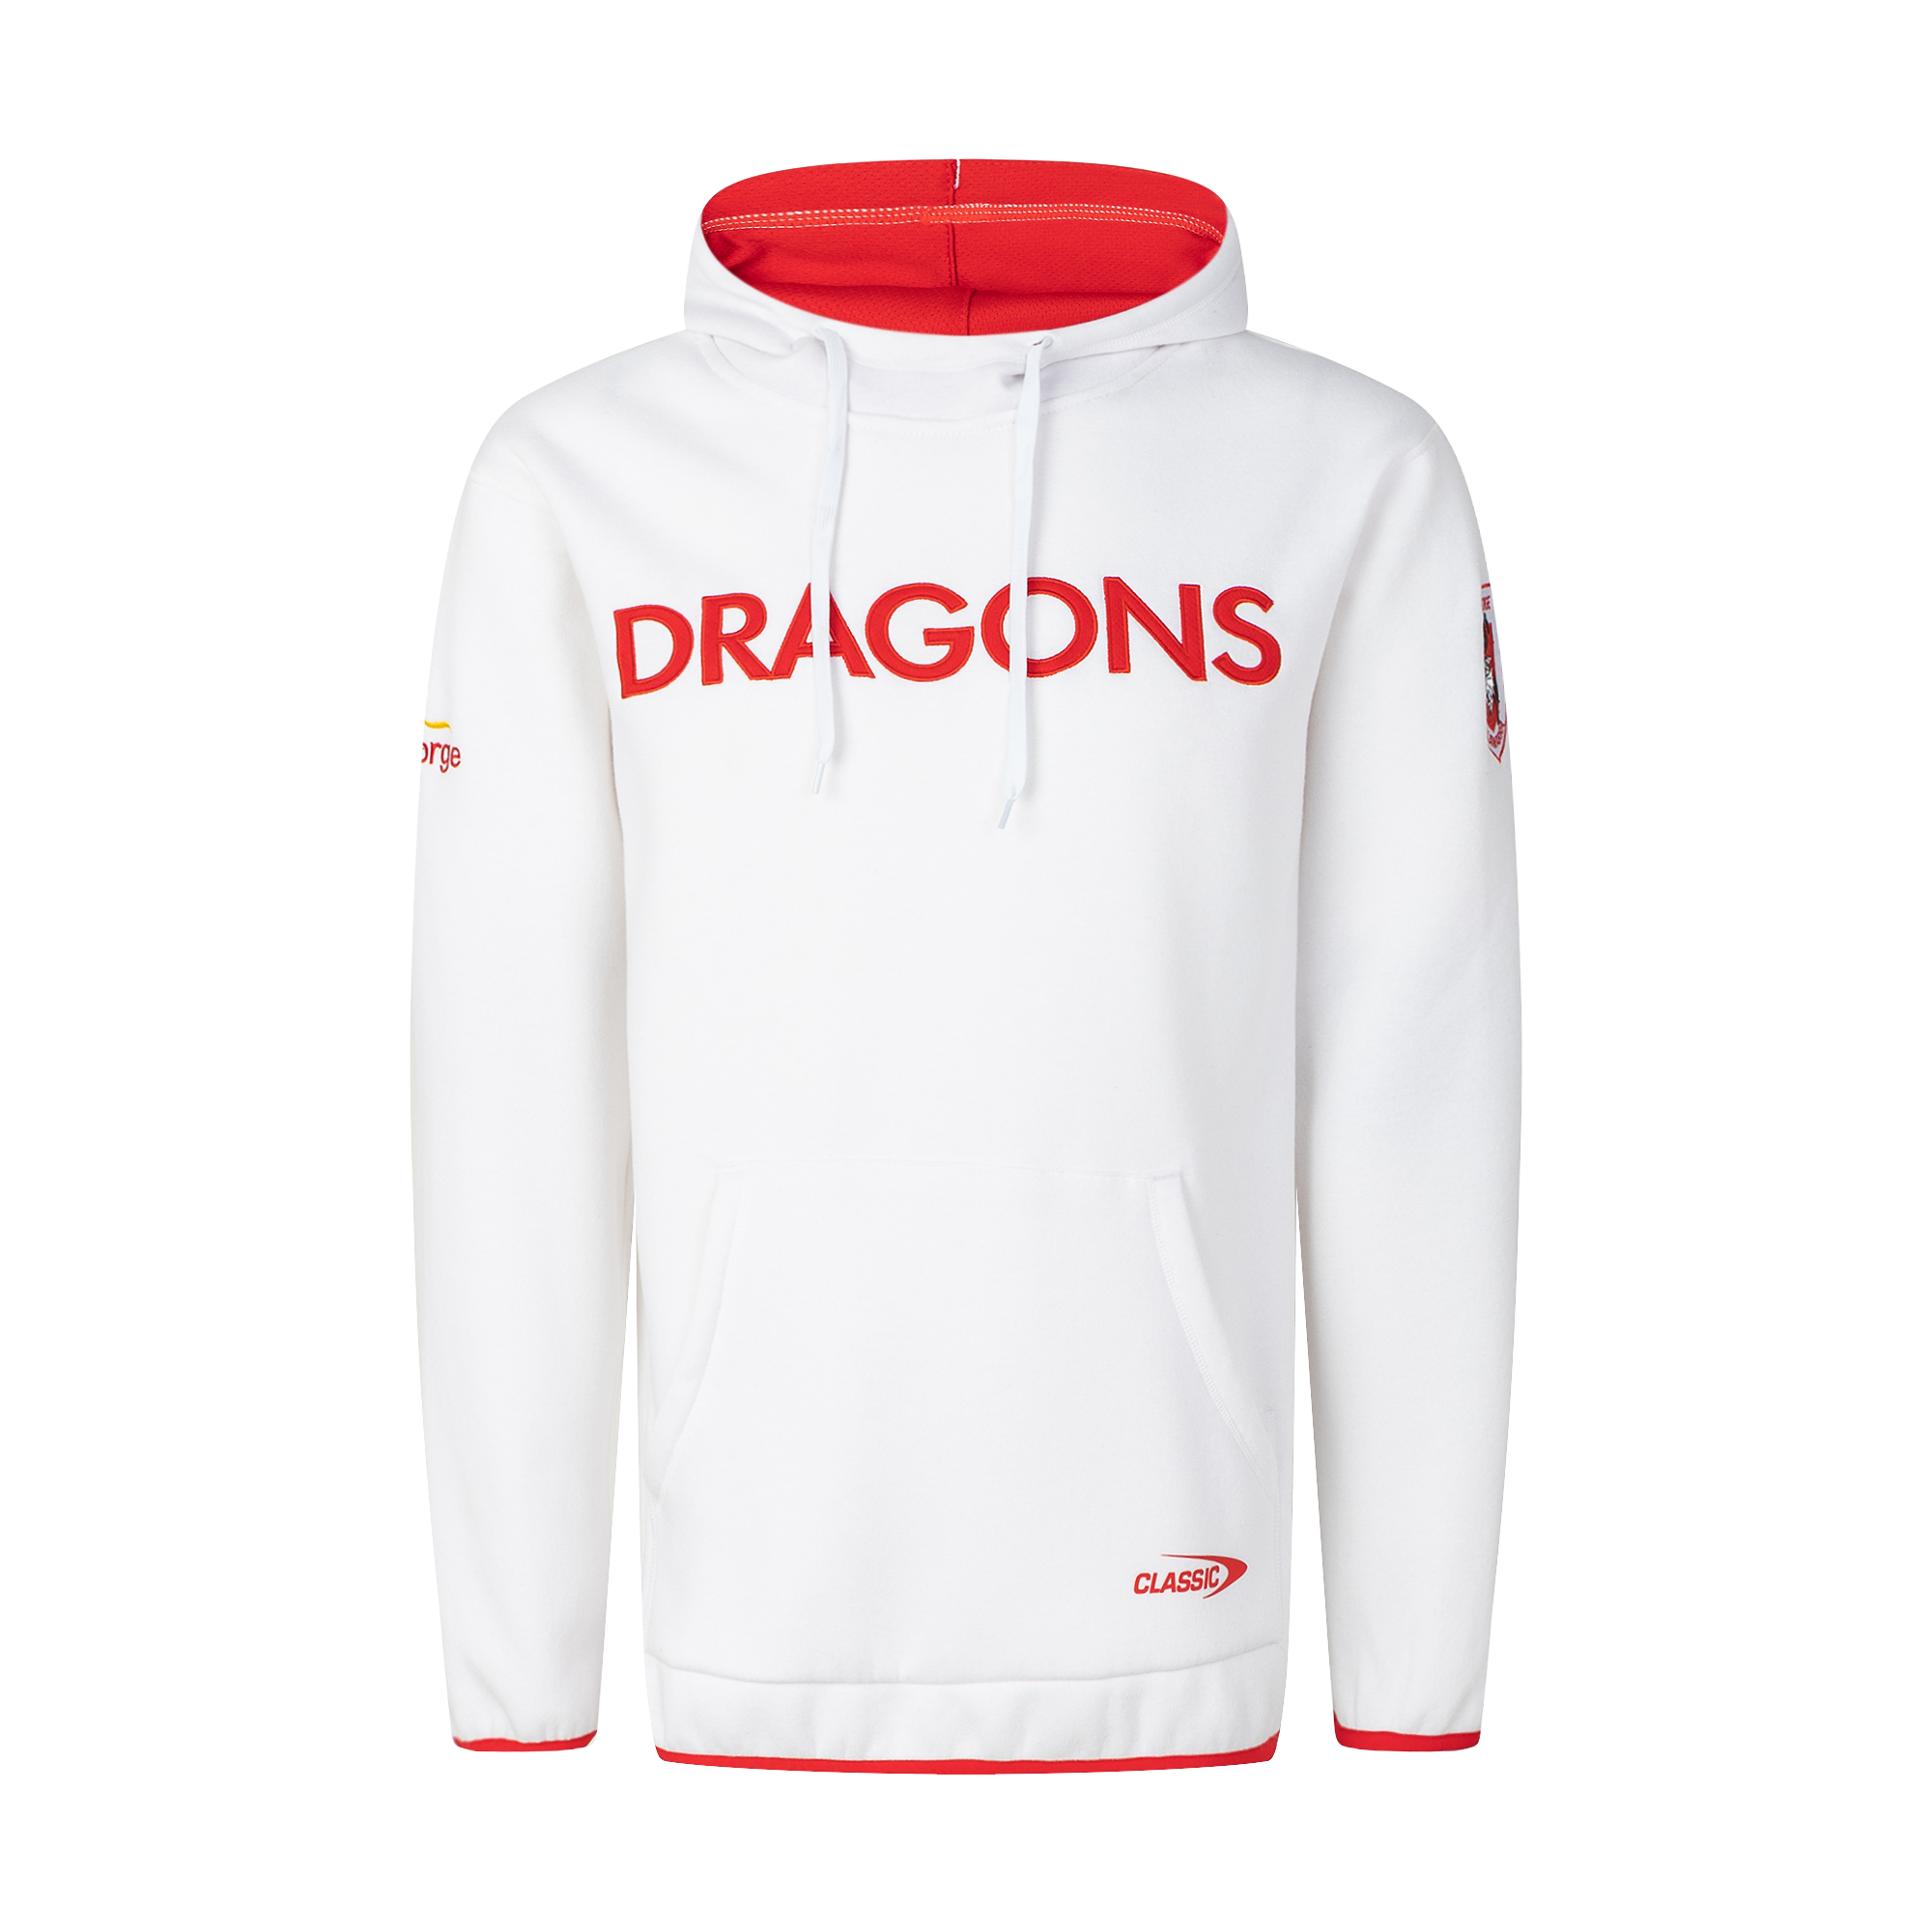 Dragons Team Store - Official Shop for St George Illawarra Dragons